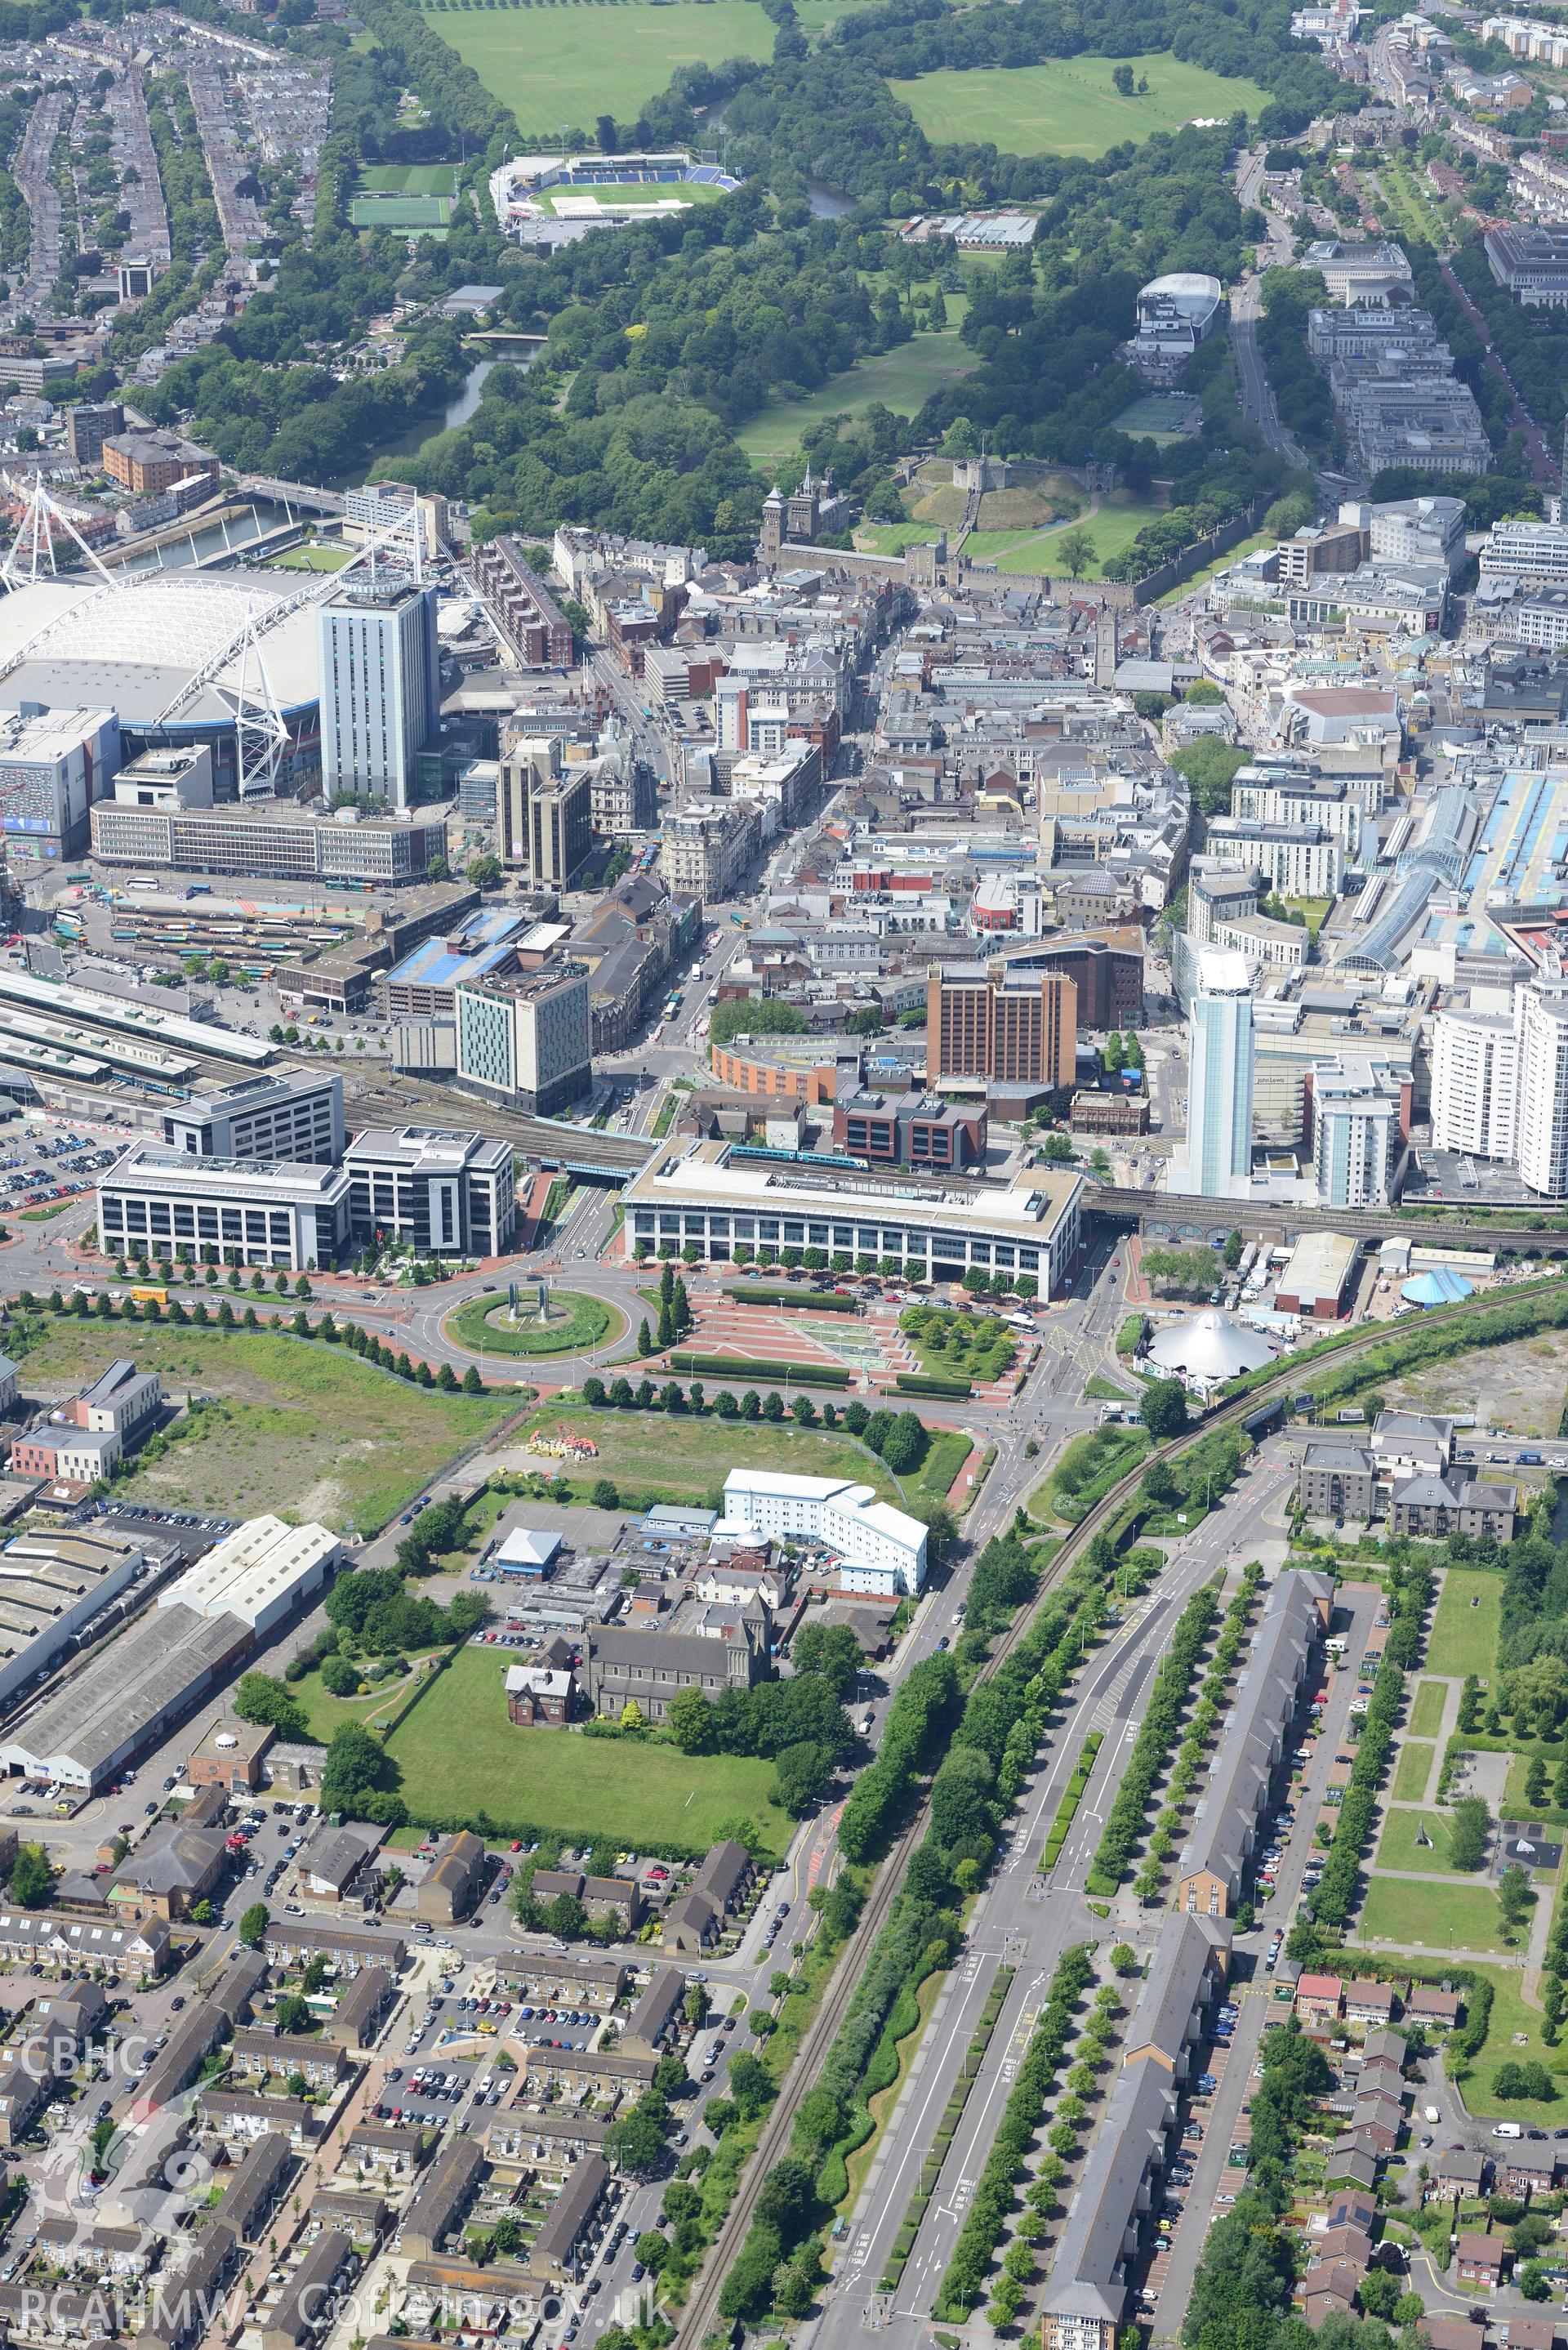 The Millennium Stadium, Cardiff. Oblique aerial photograph taken during the Royal Commission's programme of archaeological aerial reconnaissance by Toby Driver on 29th June 2015.